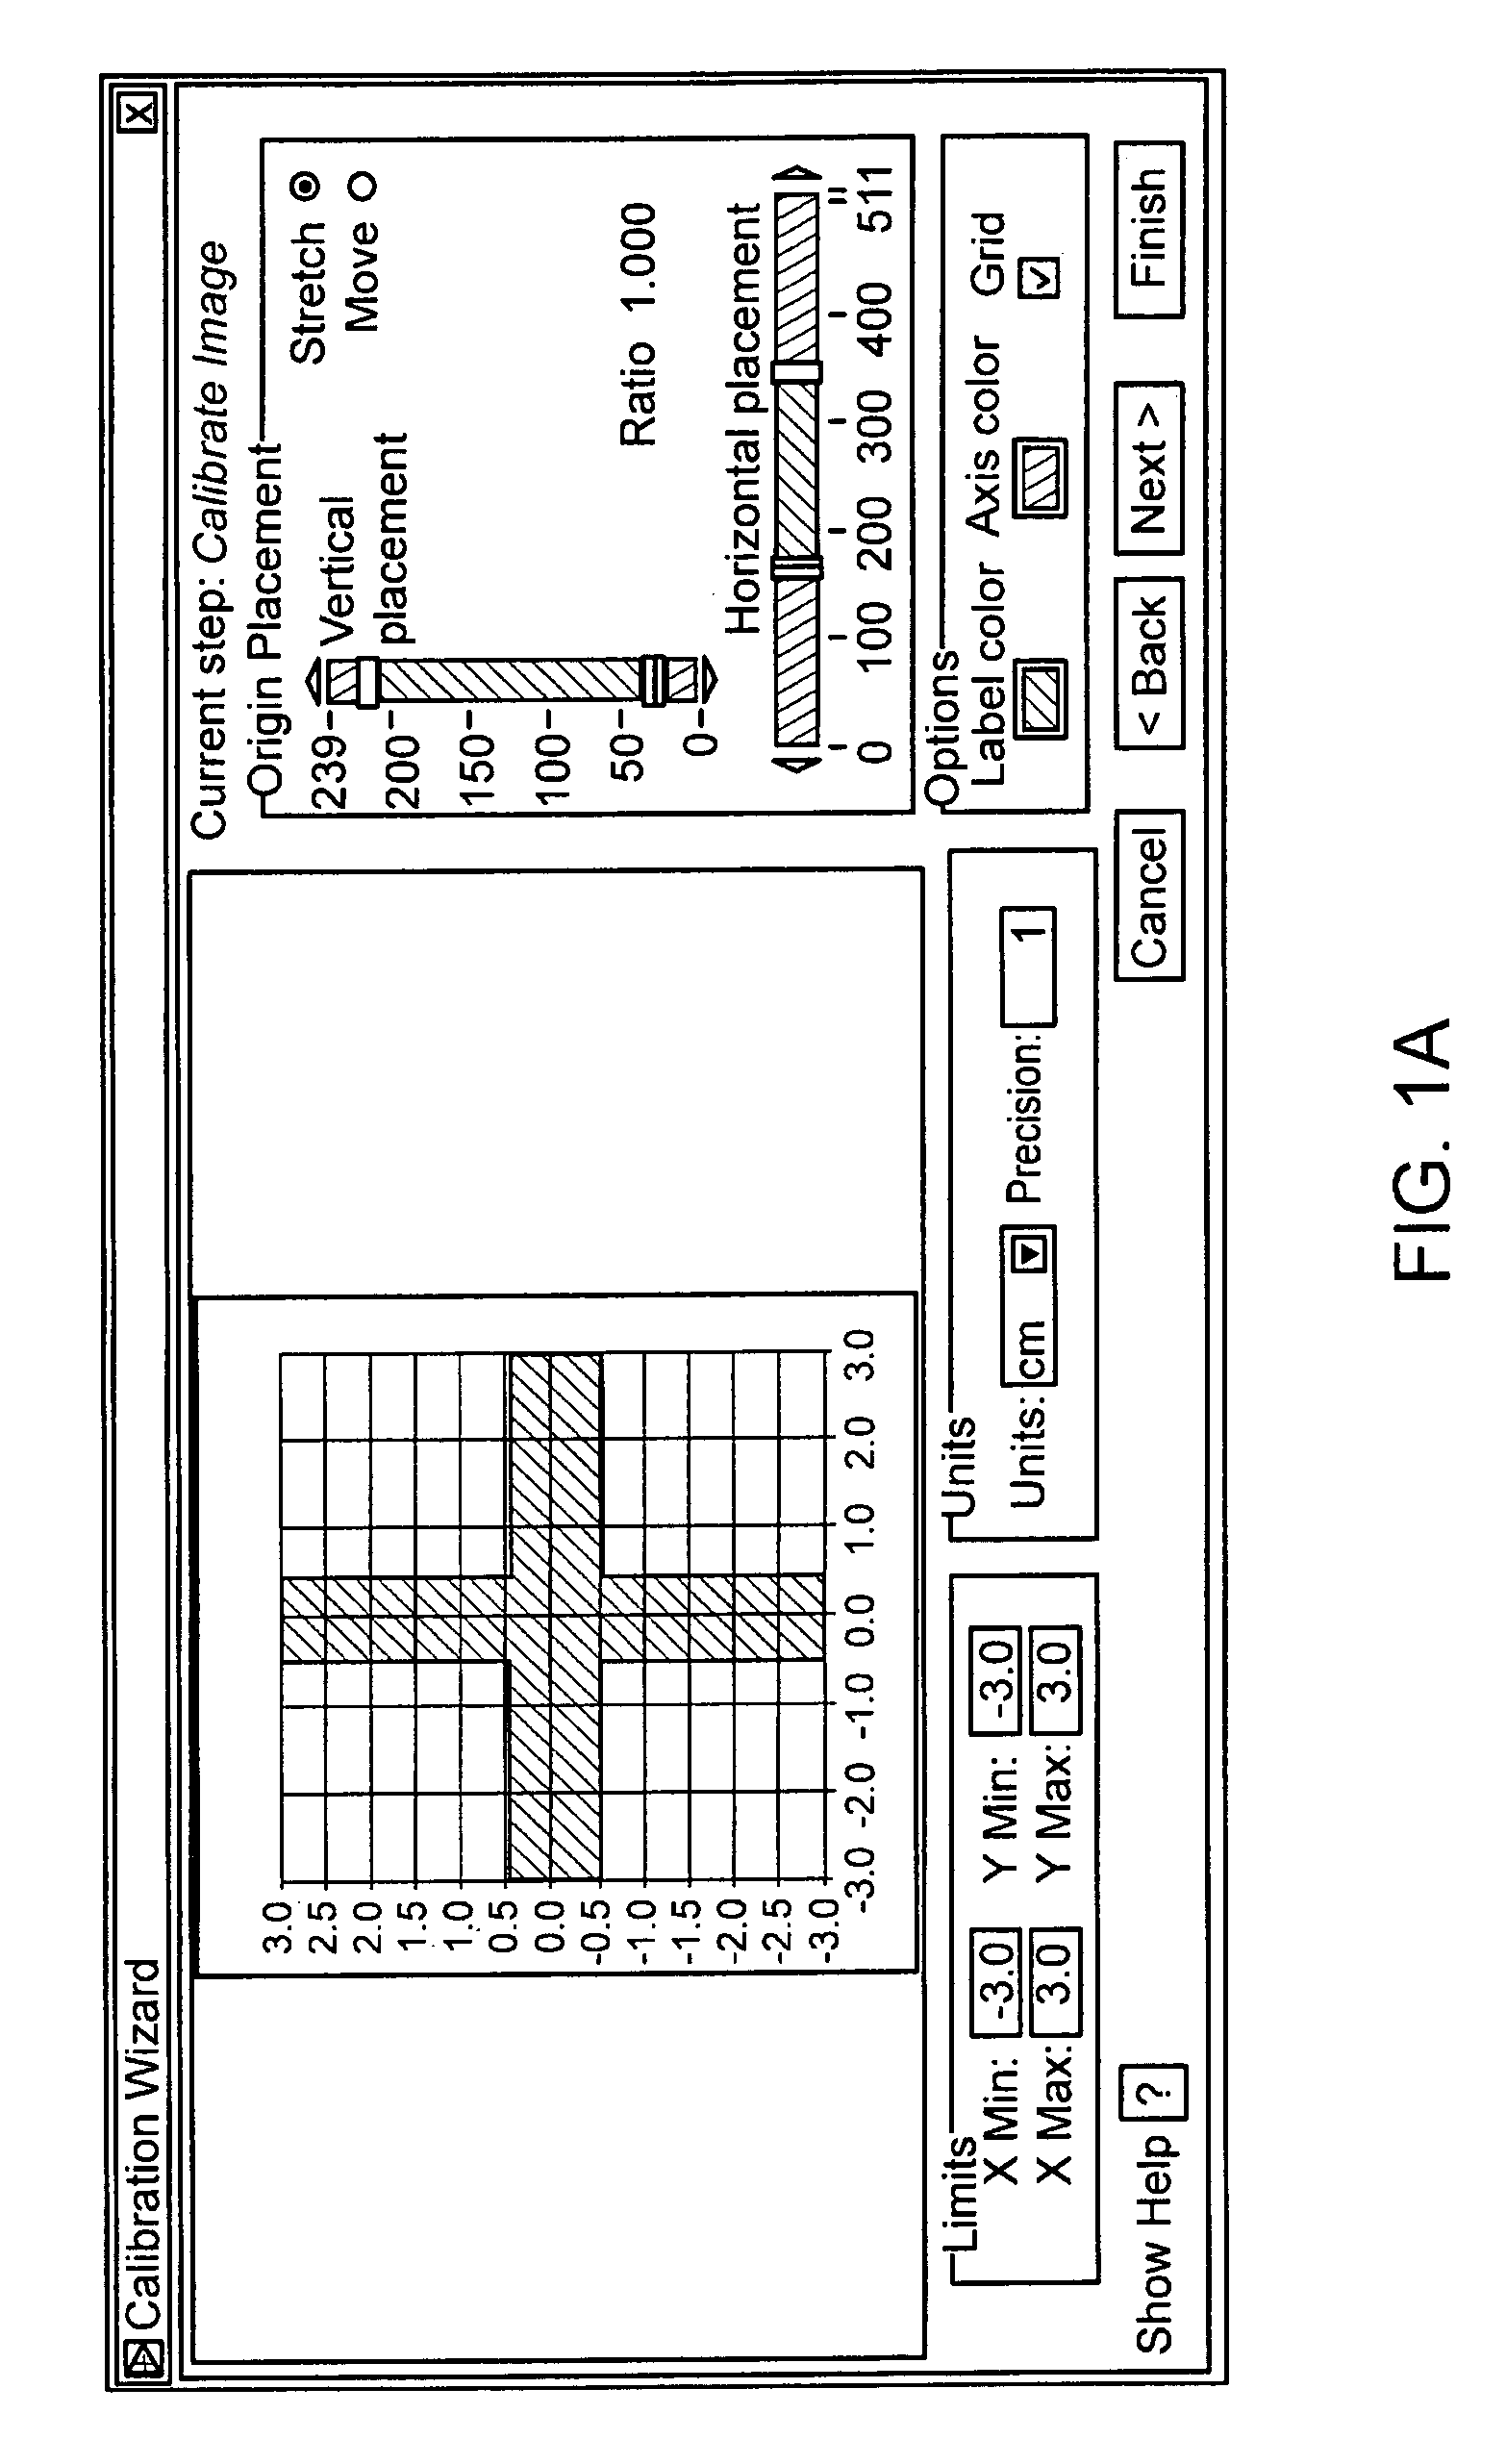 Spray data analysis and characterization system